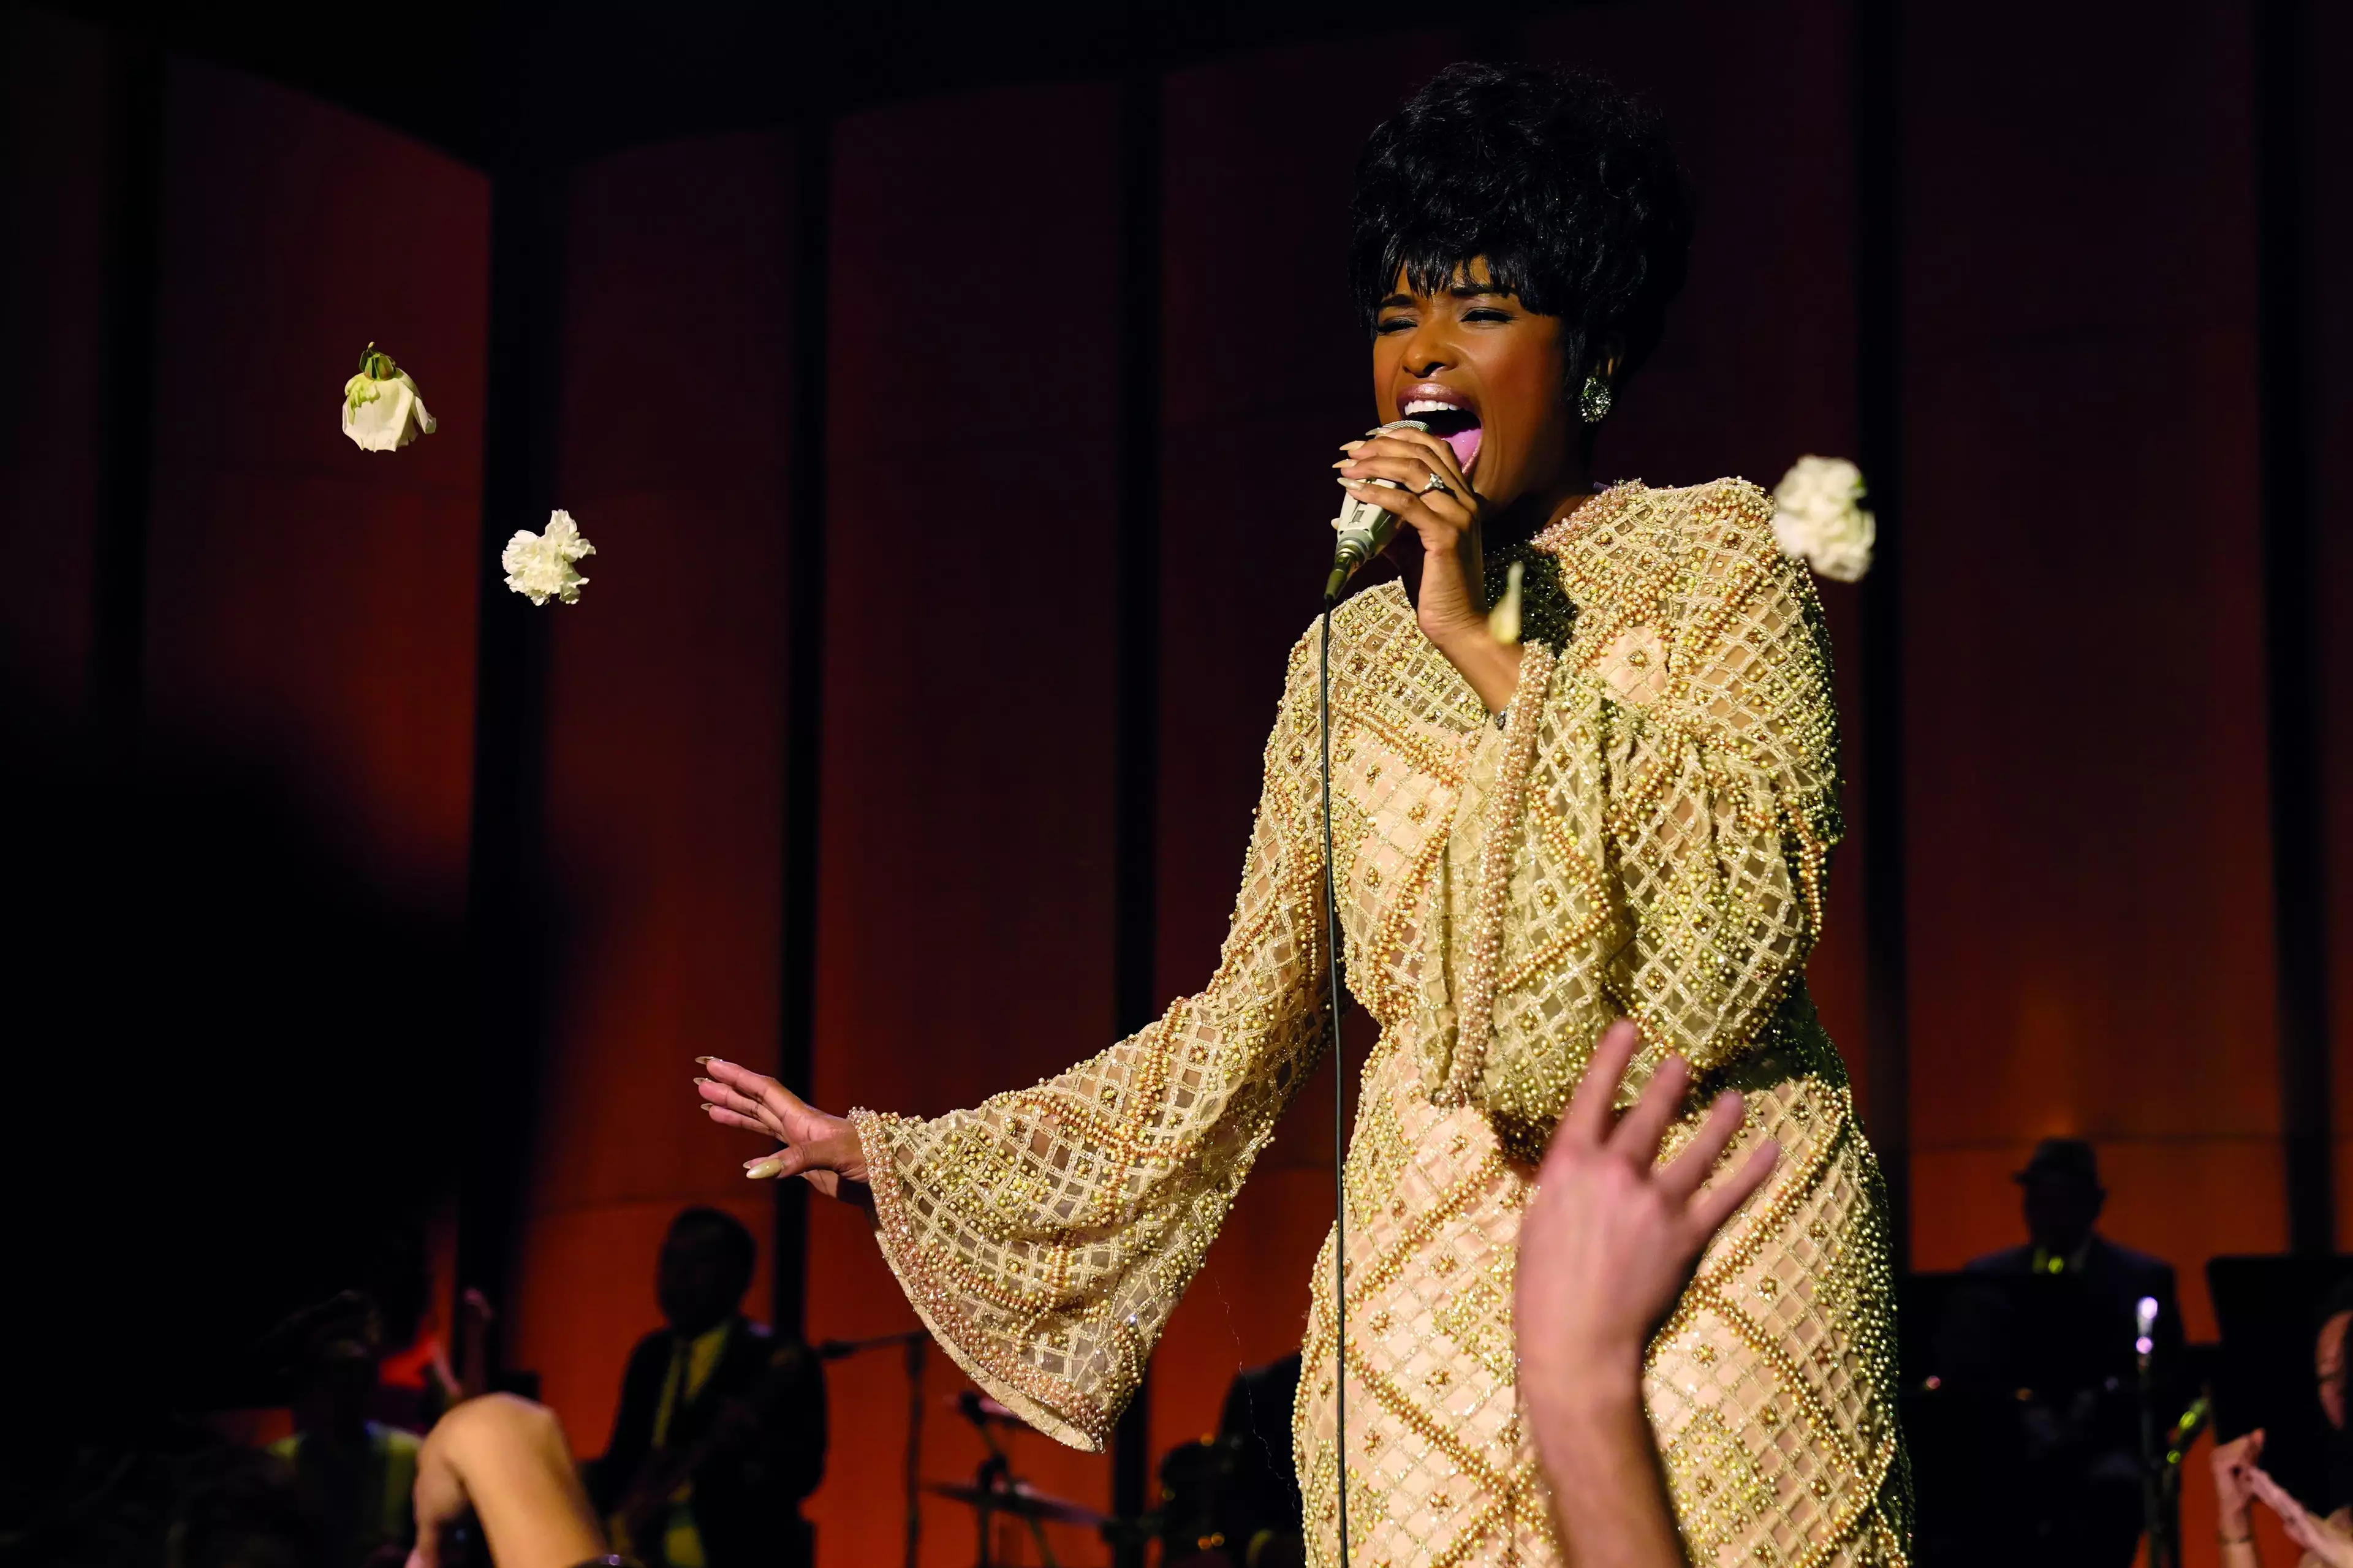 The movie follows the rise of Aretha Franklin's career from a childhood of singing in her father's church's choir to international superstardom (